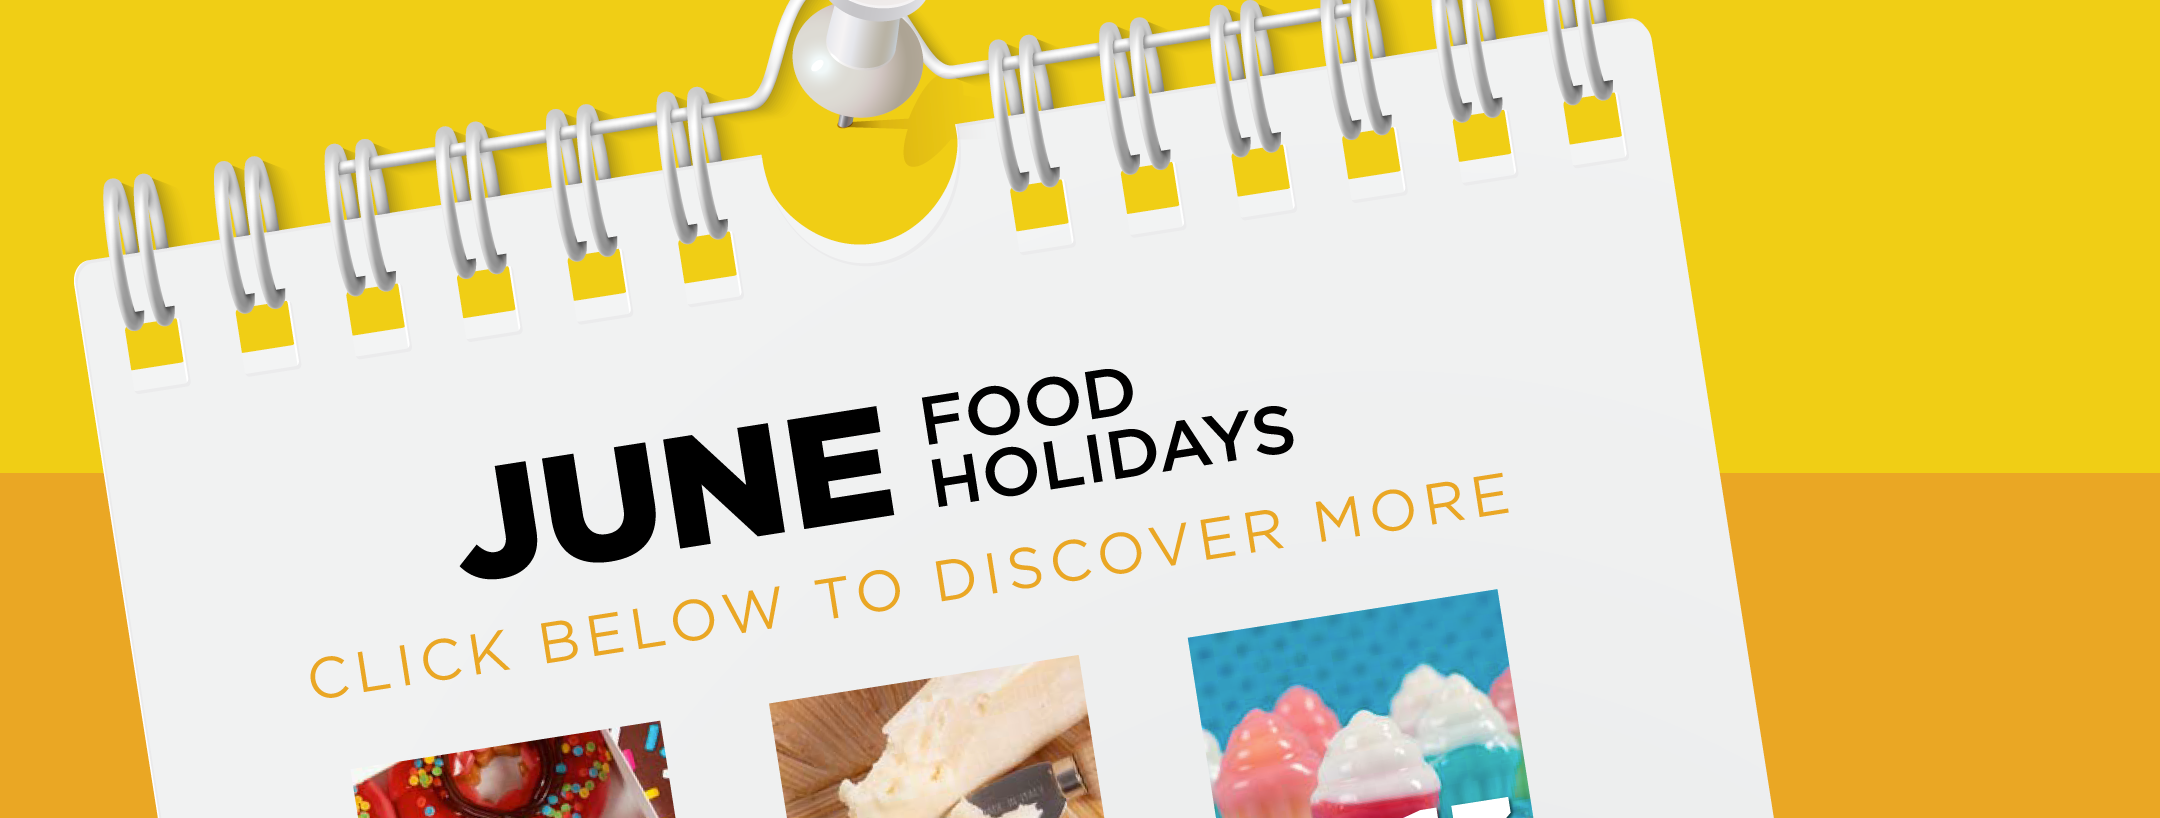 9 June Food Holidays to Bust Out Right Now!